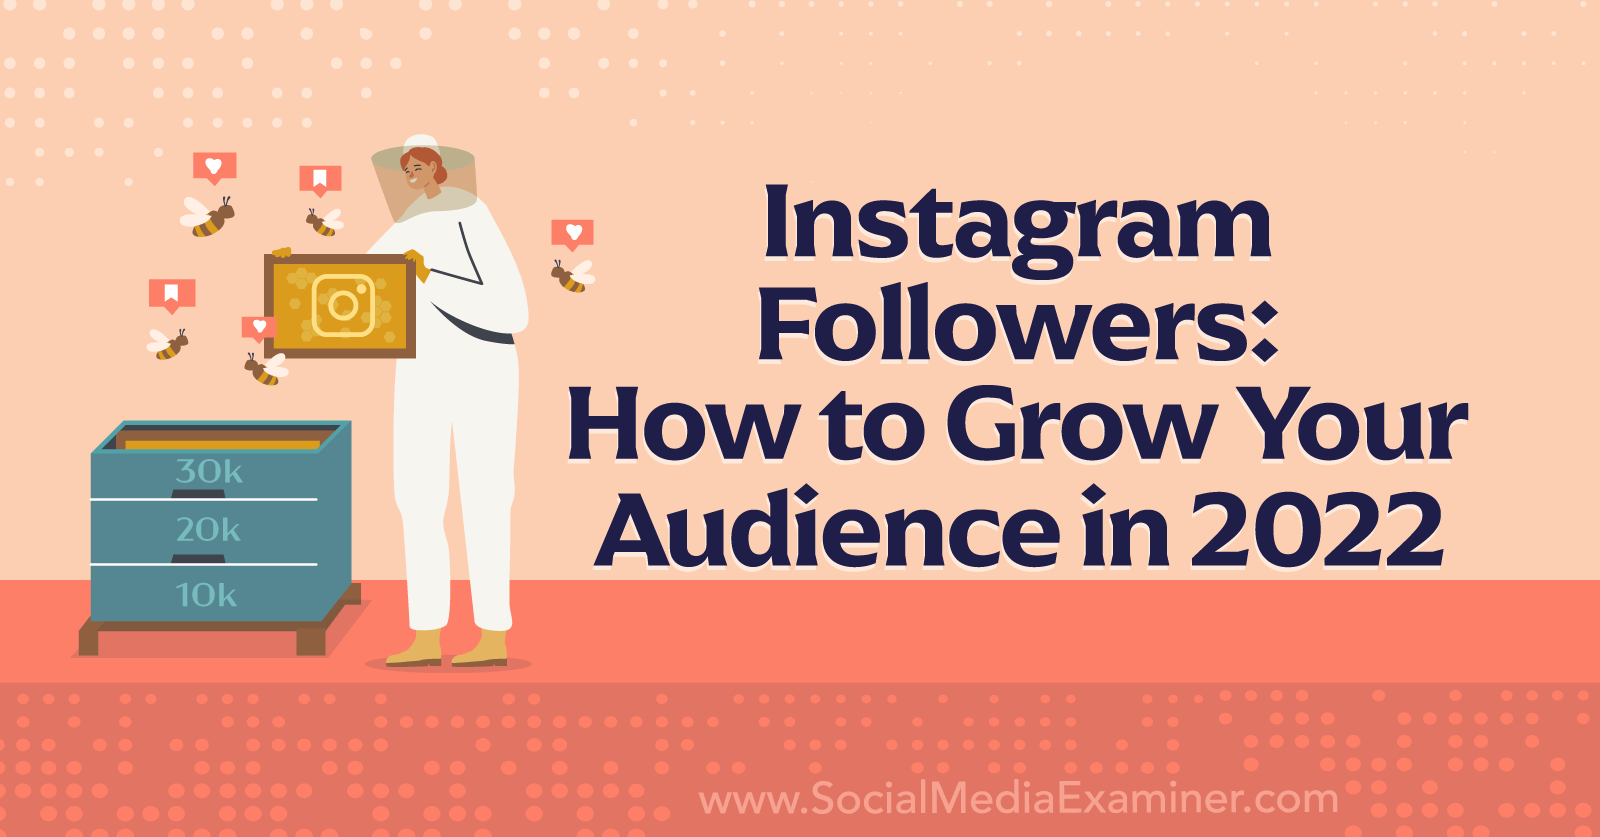 Instagram Followers: How to Grow Your Audience in 2022-Social Media Examiner